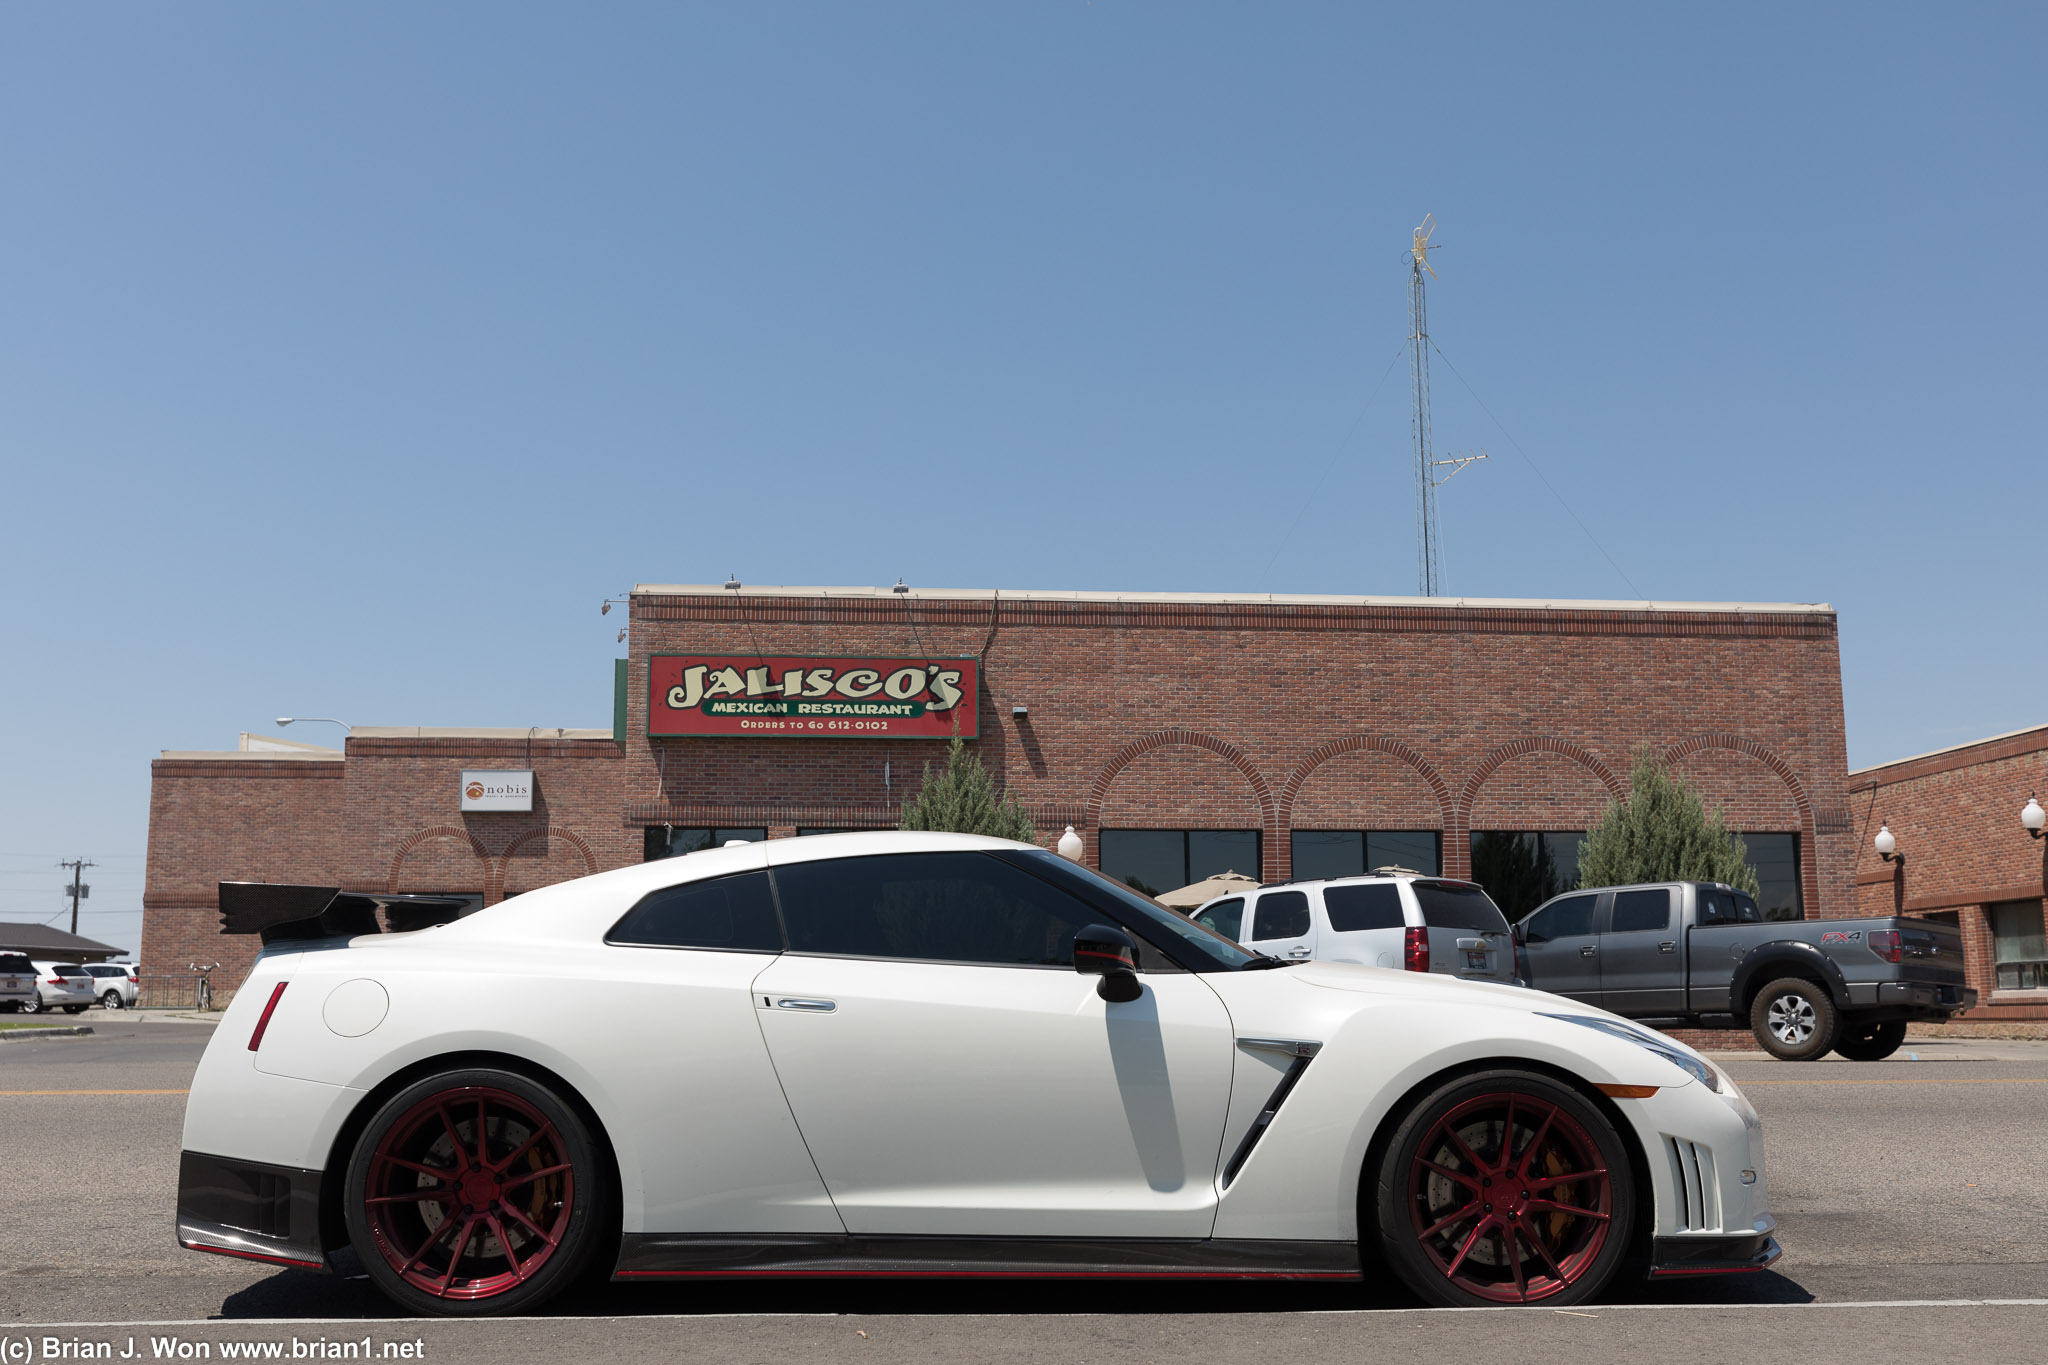 Completely unexpected sighting in a town of 56,000: a fixed up R35 GT-R.